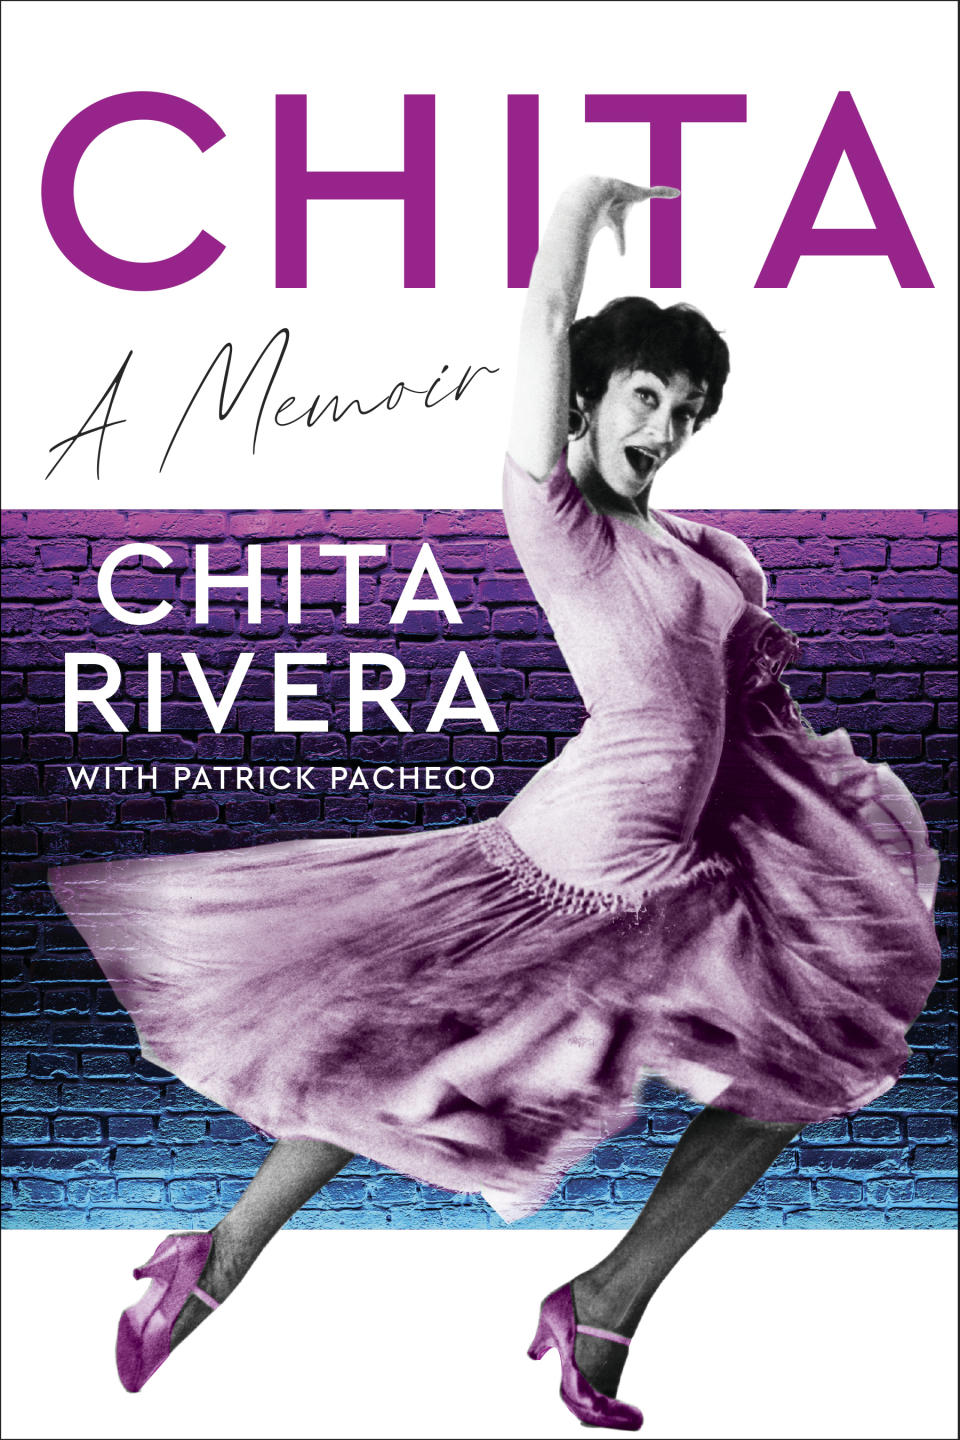 This cover image released by HarperOne shows "Chita: A Memoir" by Chita Rivera with Patrick Pacheco. (HarperOne via AP)